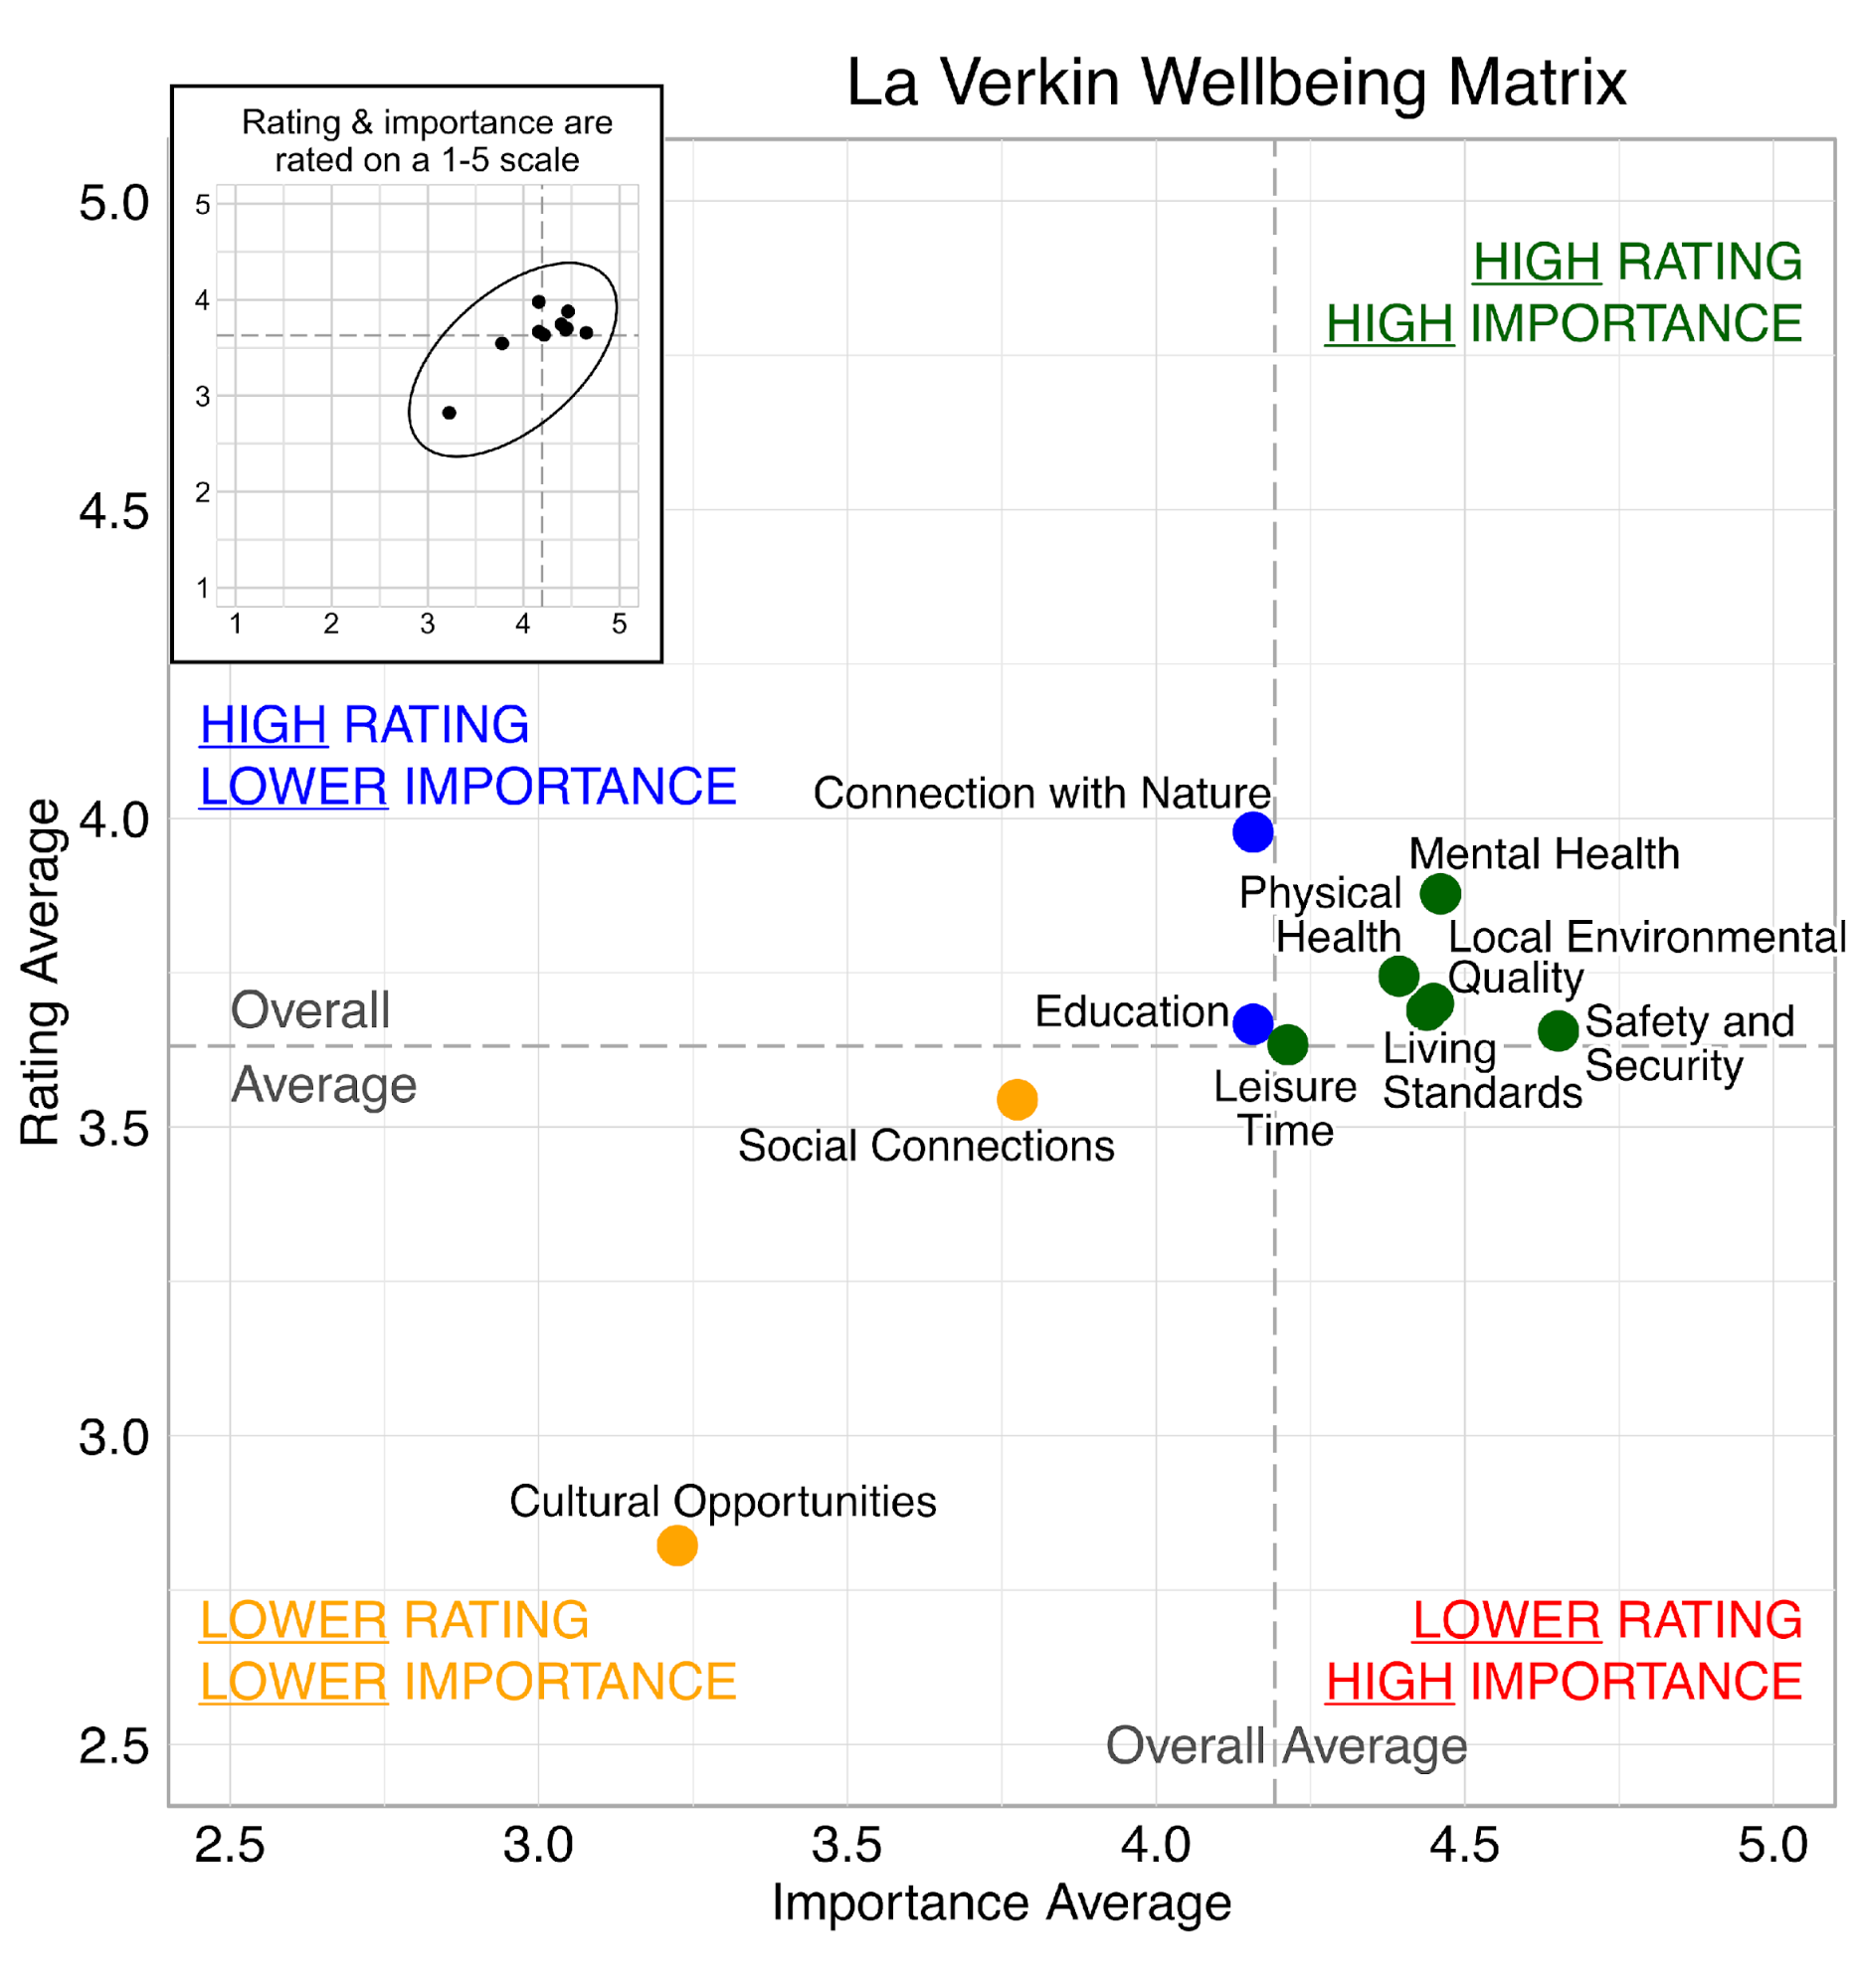 Scatterplot. Title: La Verkin Wellbeing Matrix. Domains are classified into four quadrants depending on their average rating and average importance as compared to the average of all the average domain ratings and the average of all the average domain importance ratings. High rating, high importance (green quadrant) domains include: Safety and Security, Living Standards, Leisure Time, Local Environmental Quality, Mental Health, and Physical Health. High rating, lower Importance (blue quadrant) domains include: Education and Connection with Nature. Lower rating, lower importance (yellow quadrant) domains include: Social Connections and Cultural Opportunities. Lower rating, high importance (red quadrant) domains include: None.